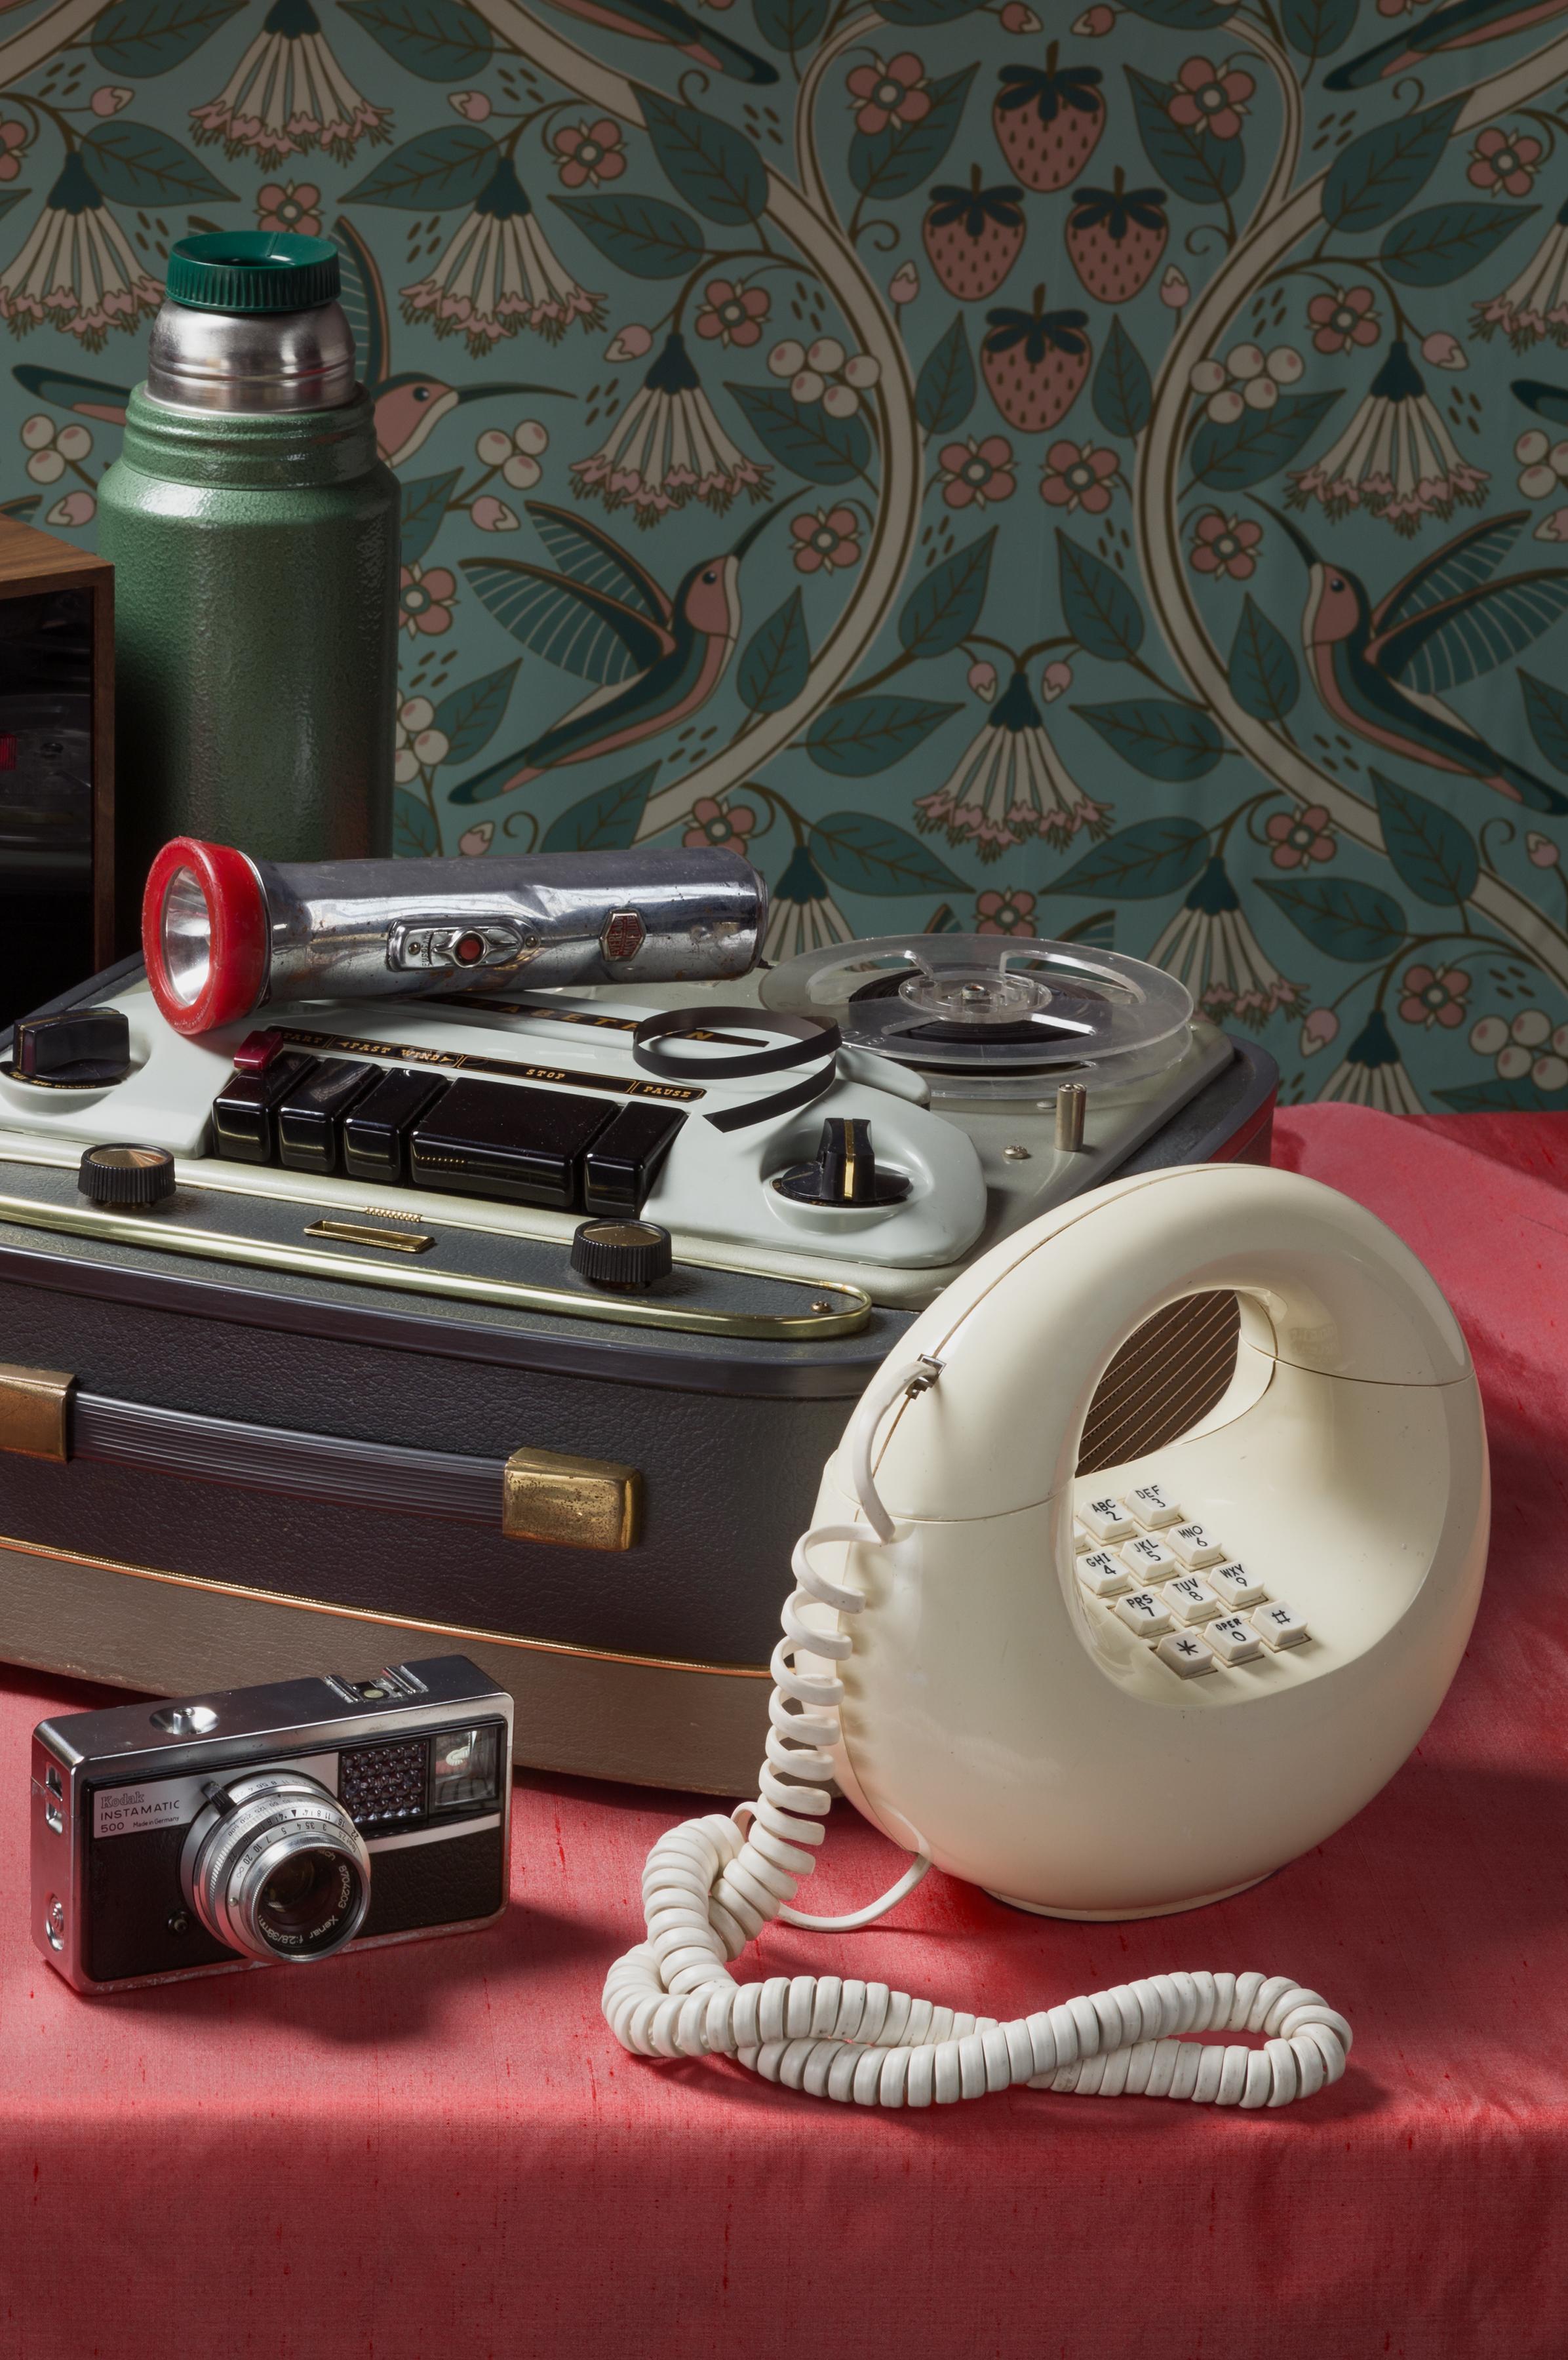 “Still Life with Answering Machine” Vintage Tech Photograph for Bird Watchers - Black Still-Life Print by Jeanette May